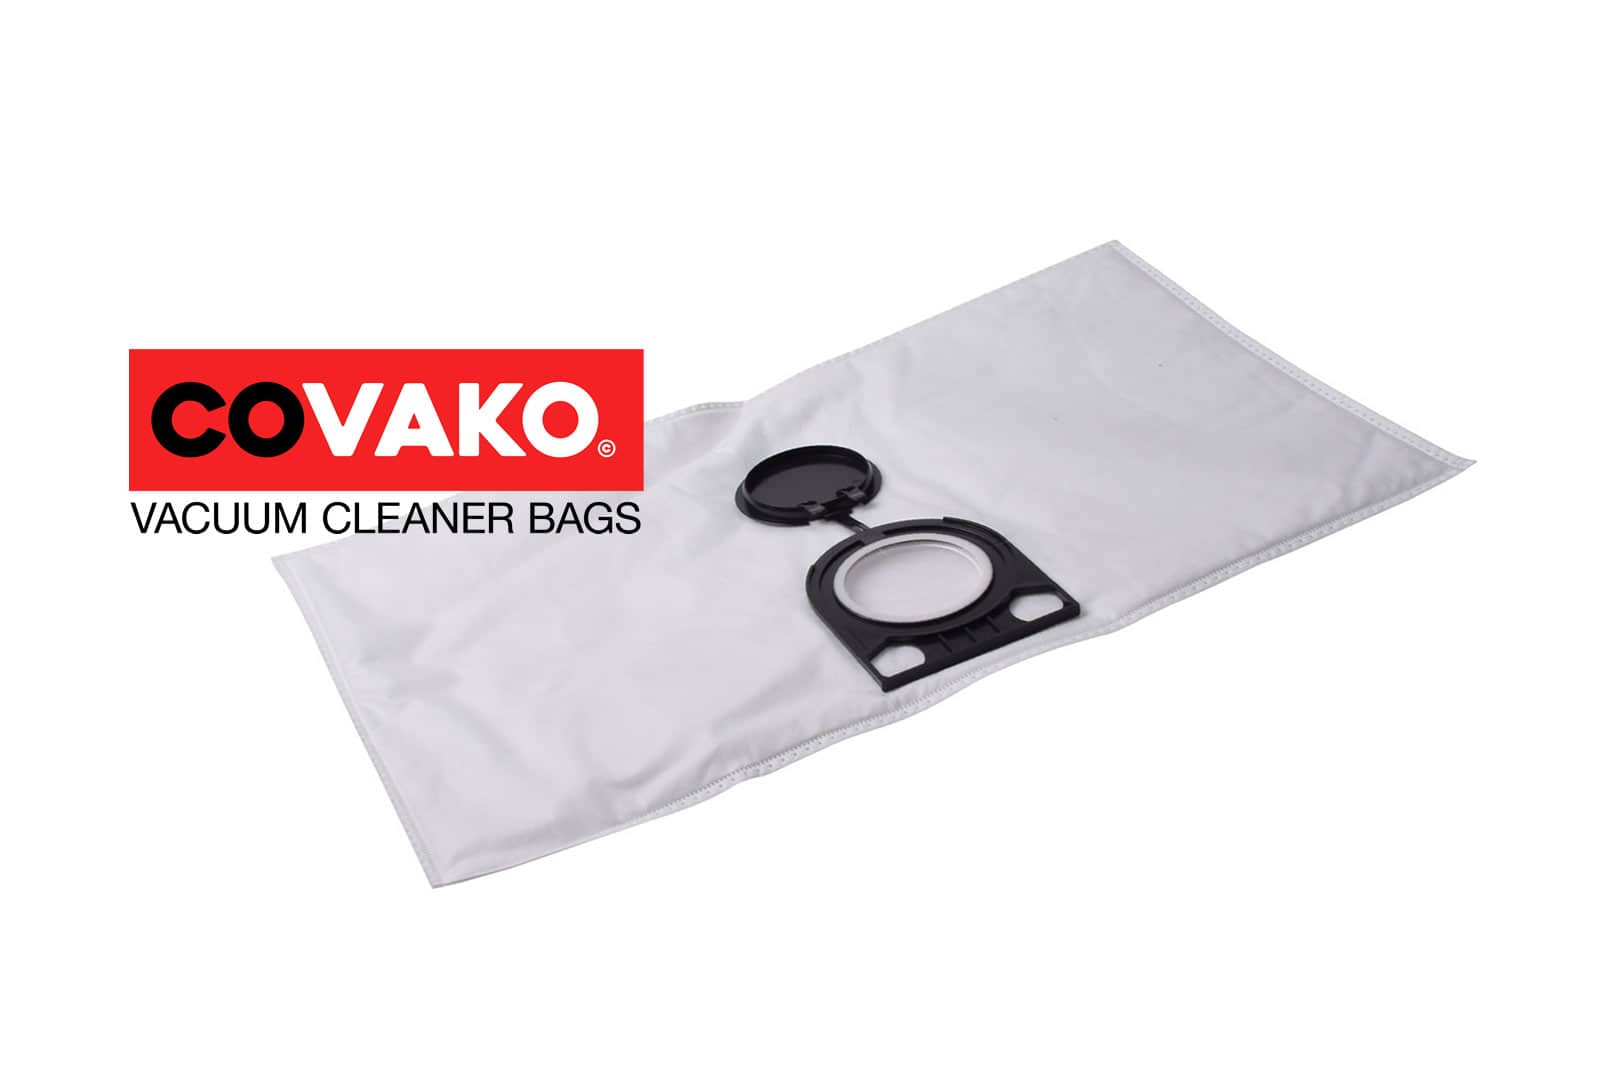 Electrostar FB 20 / Synthesis - Electrostar vacuum cleaner bags